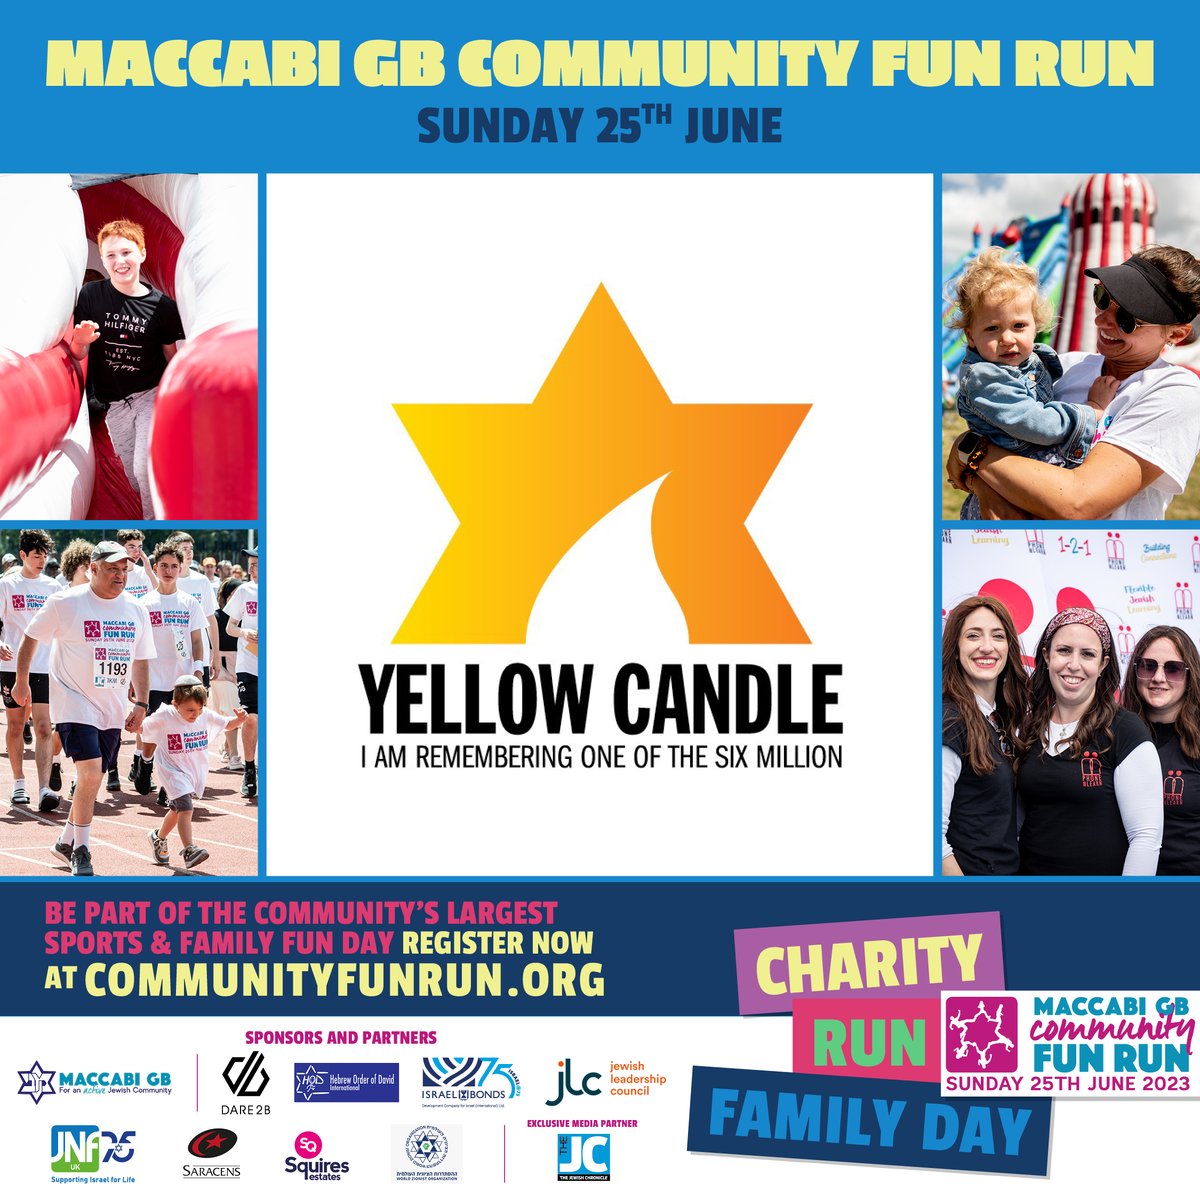 The Maccabi GB Community Fun Run is back and happening on Sunday 25th June 2023! Join us on the day and sign up to run for Yellow Candle now: register.enthuse.com/ps/event/Macca…